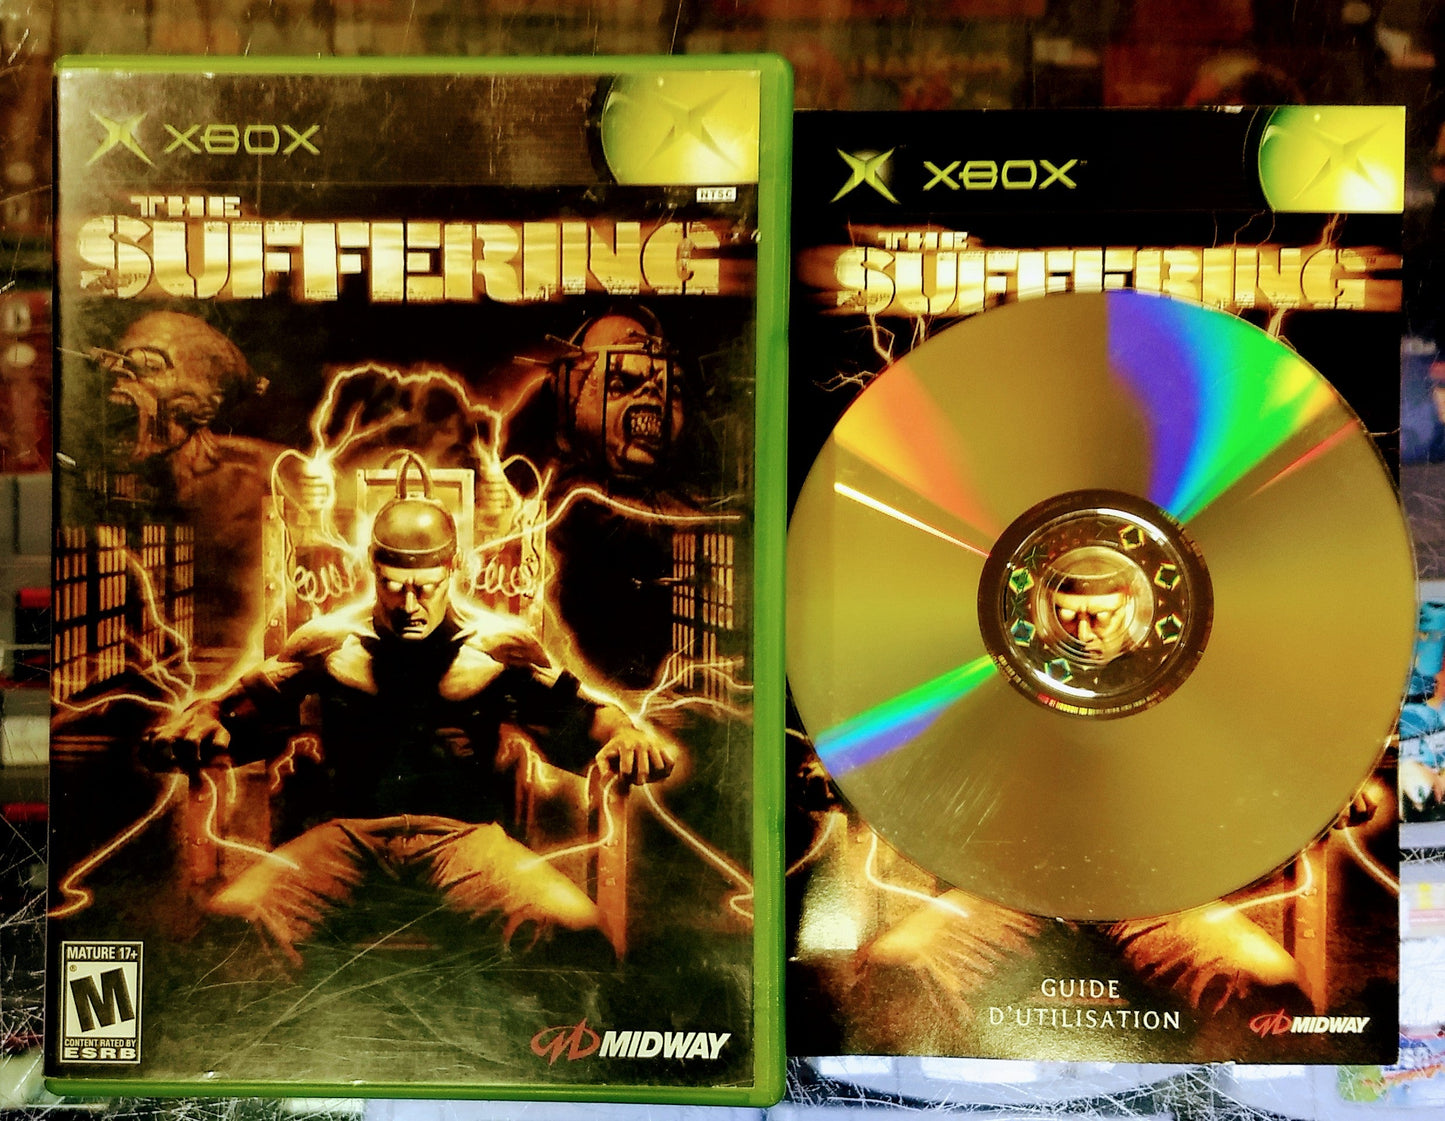 THE SUFFERING (XBOX) - jeux video game-x